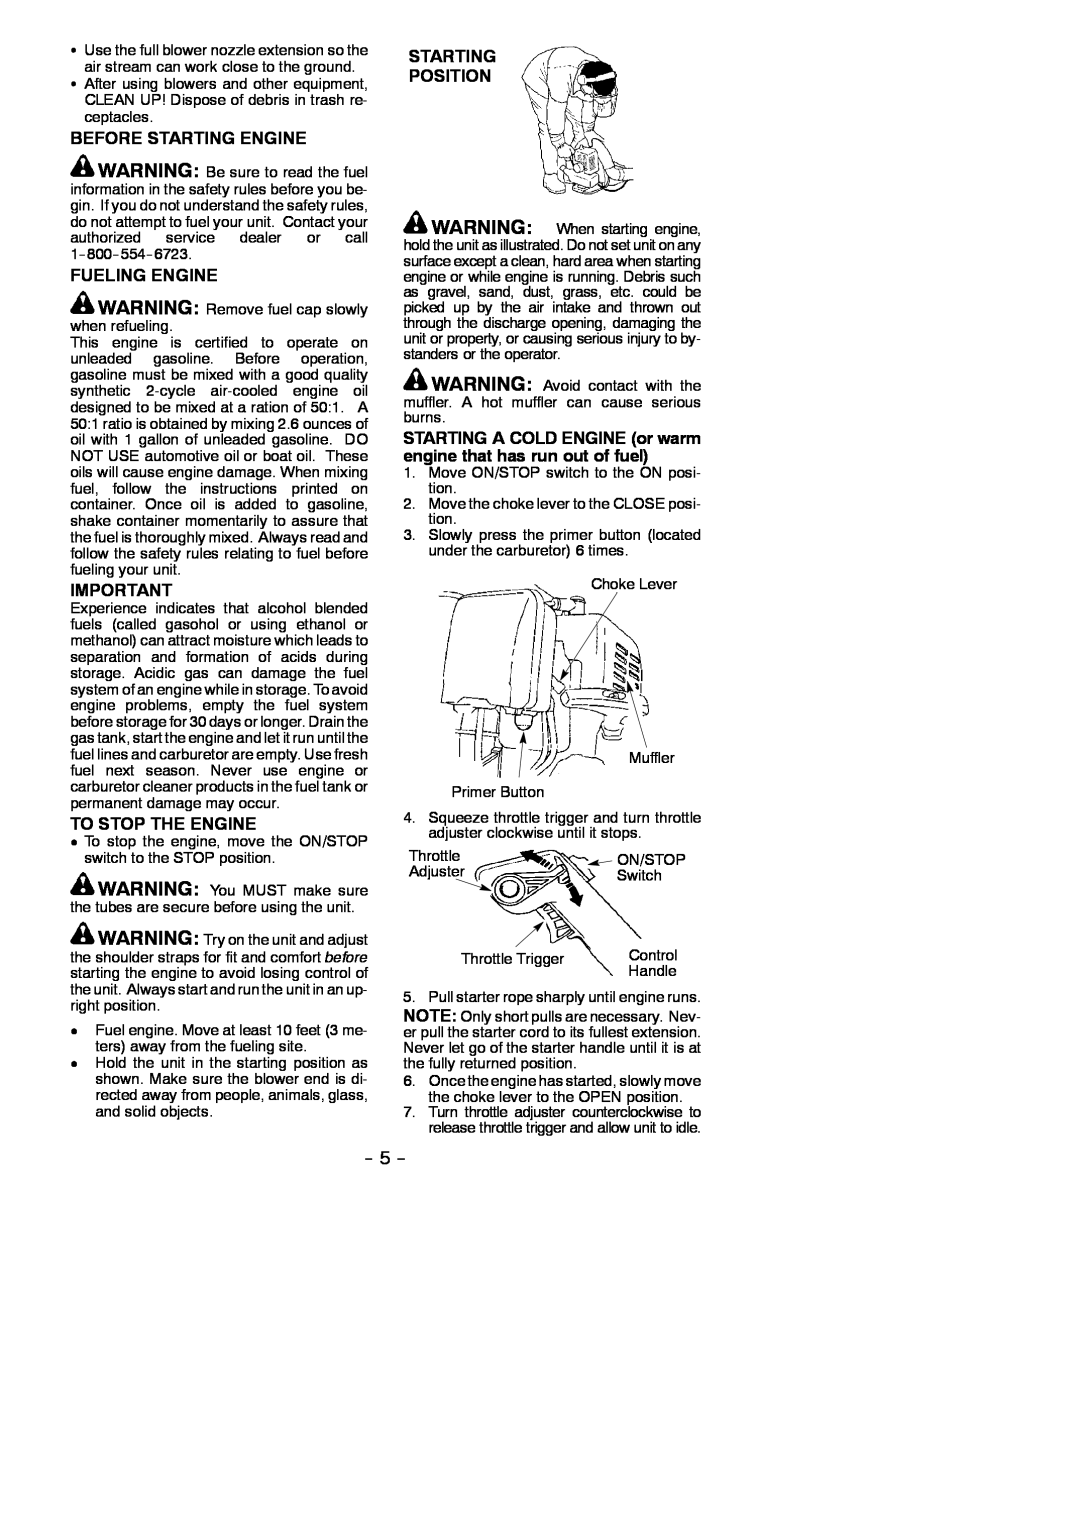 Poulan BP402 LE instruction manual Before Starting Engine, Fueling Engine, To Stop The Engine, Starting Position 